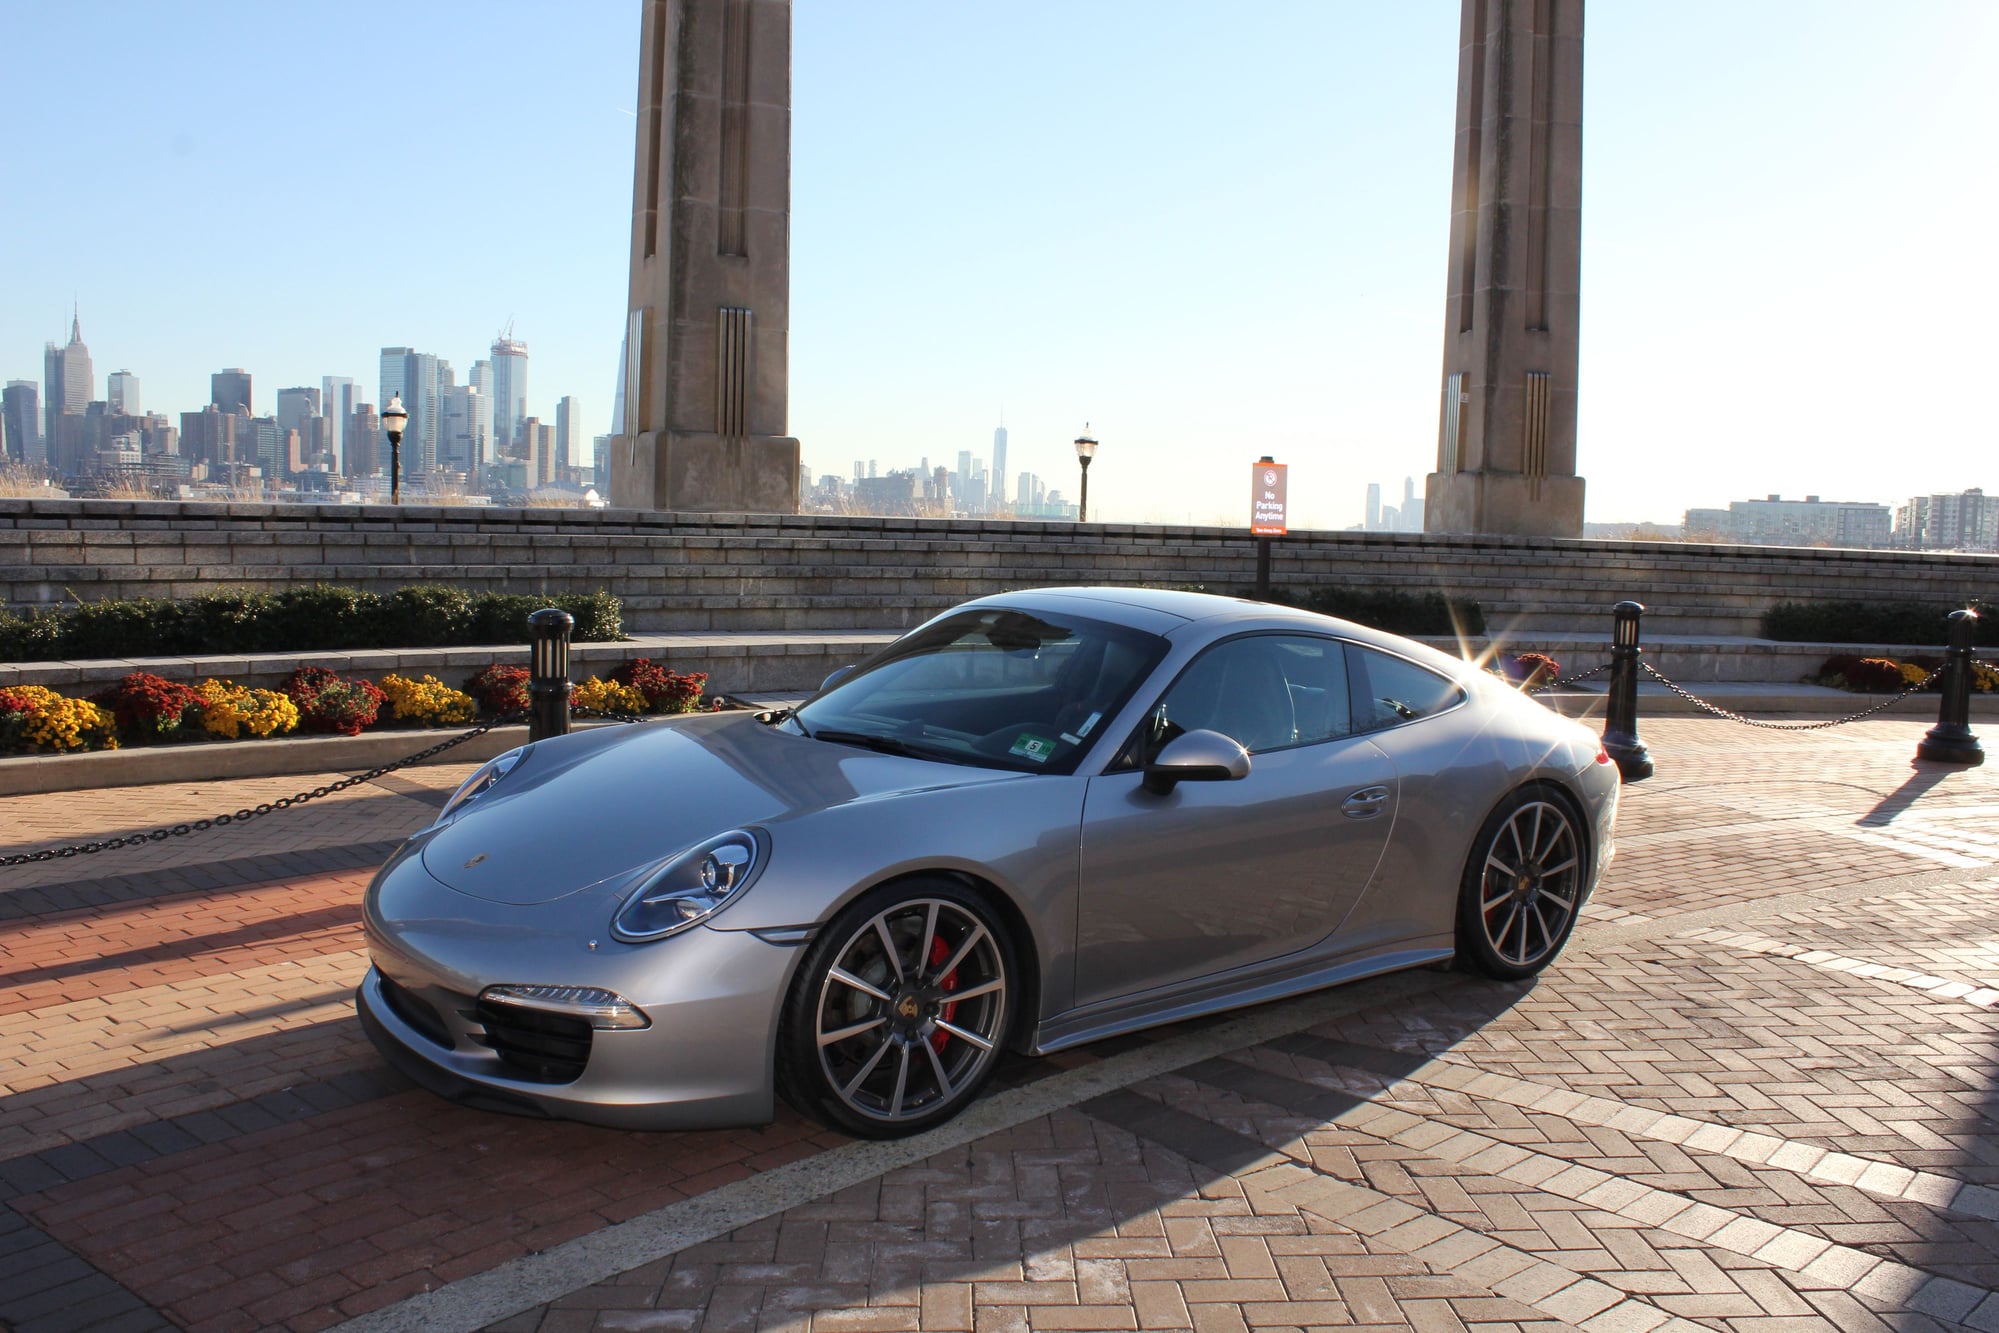 2012 Porsche 911 - Porsche 911 Carrera S (991.1) For Sale 22k Miles - Used - VIN WP0AB2A92CS121841 - 22,678 Miles - 6 cyl - 2WD - Manual - Coupe - West New York, NJ 07093, United States